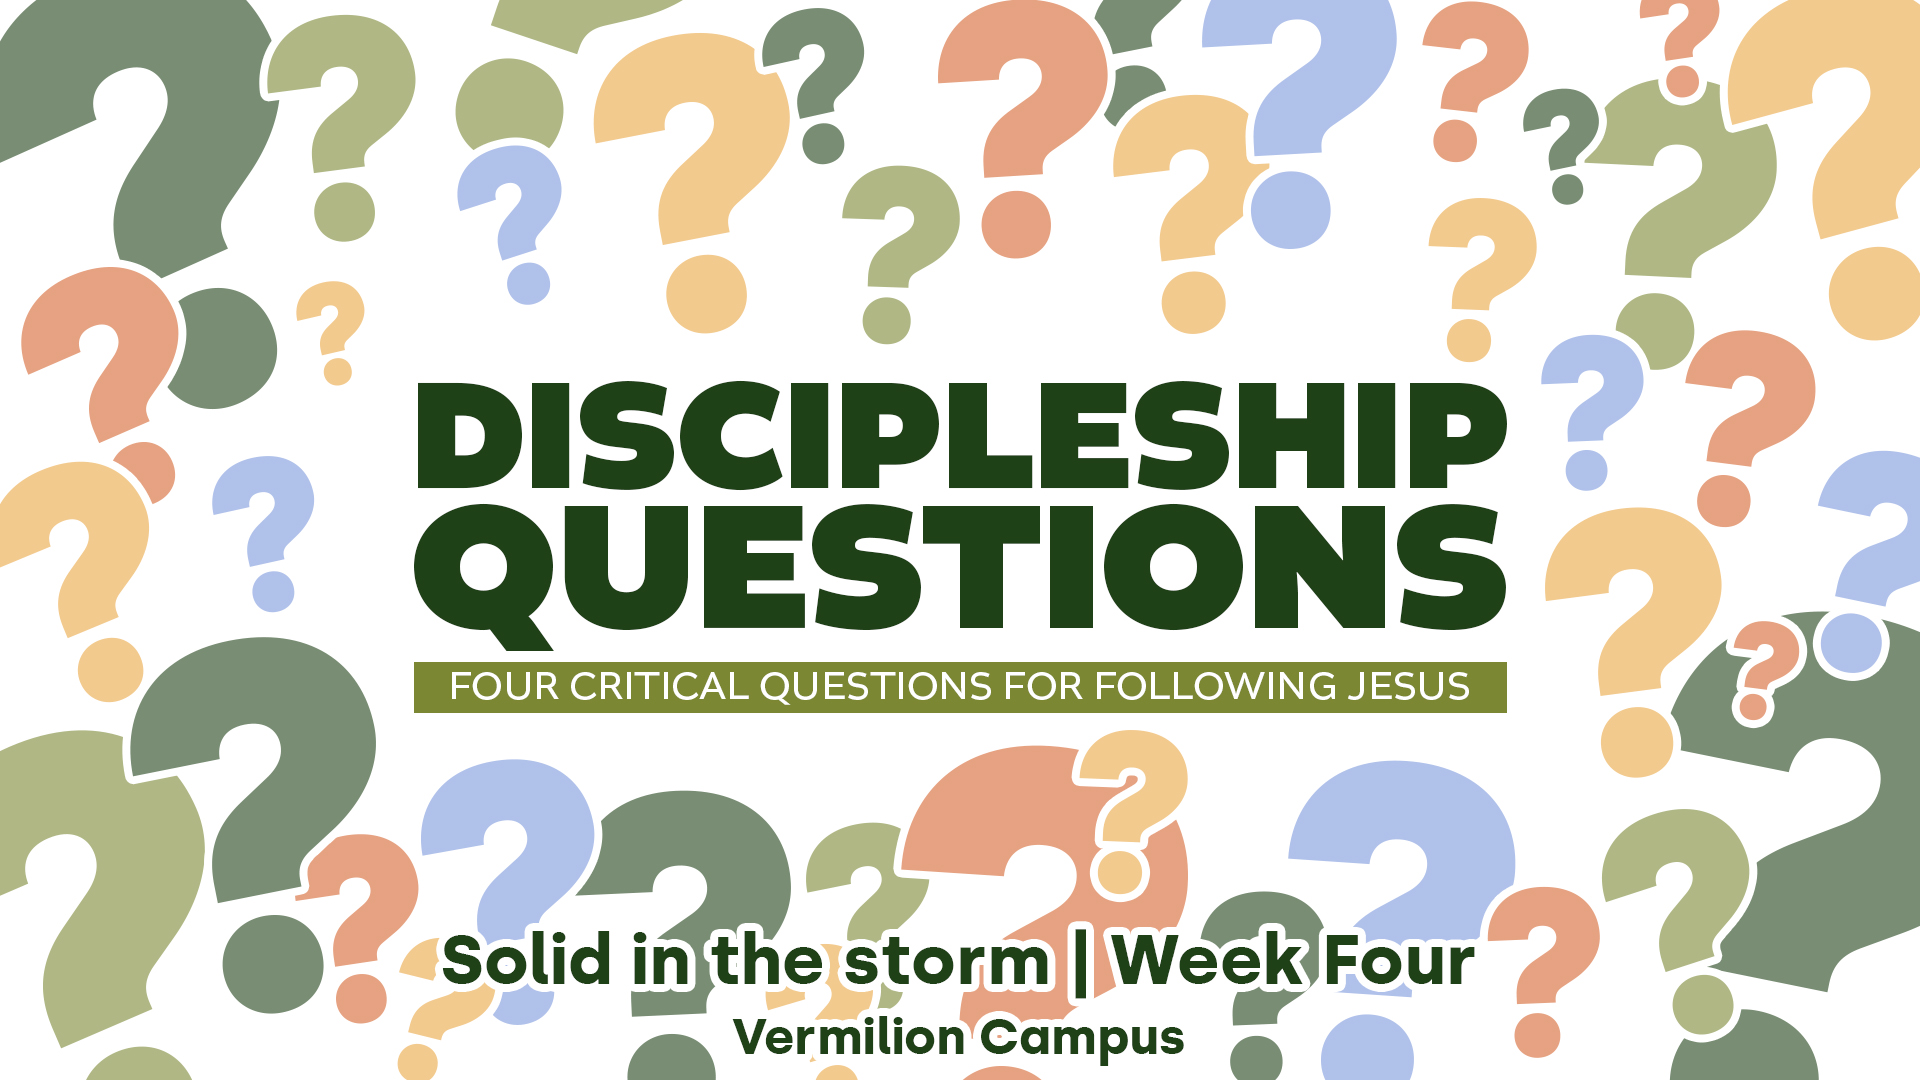 Solid in the storm - Week Four (Vermilion Campus)